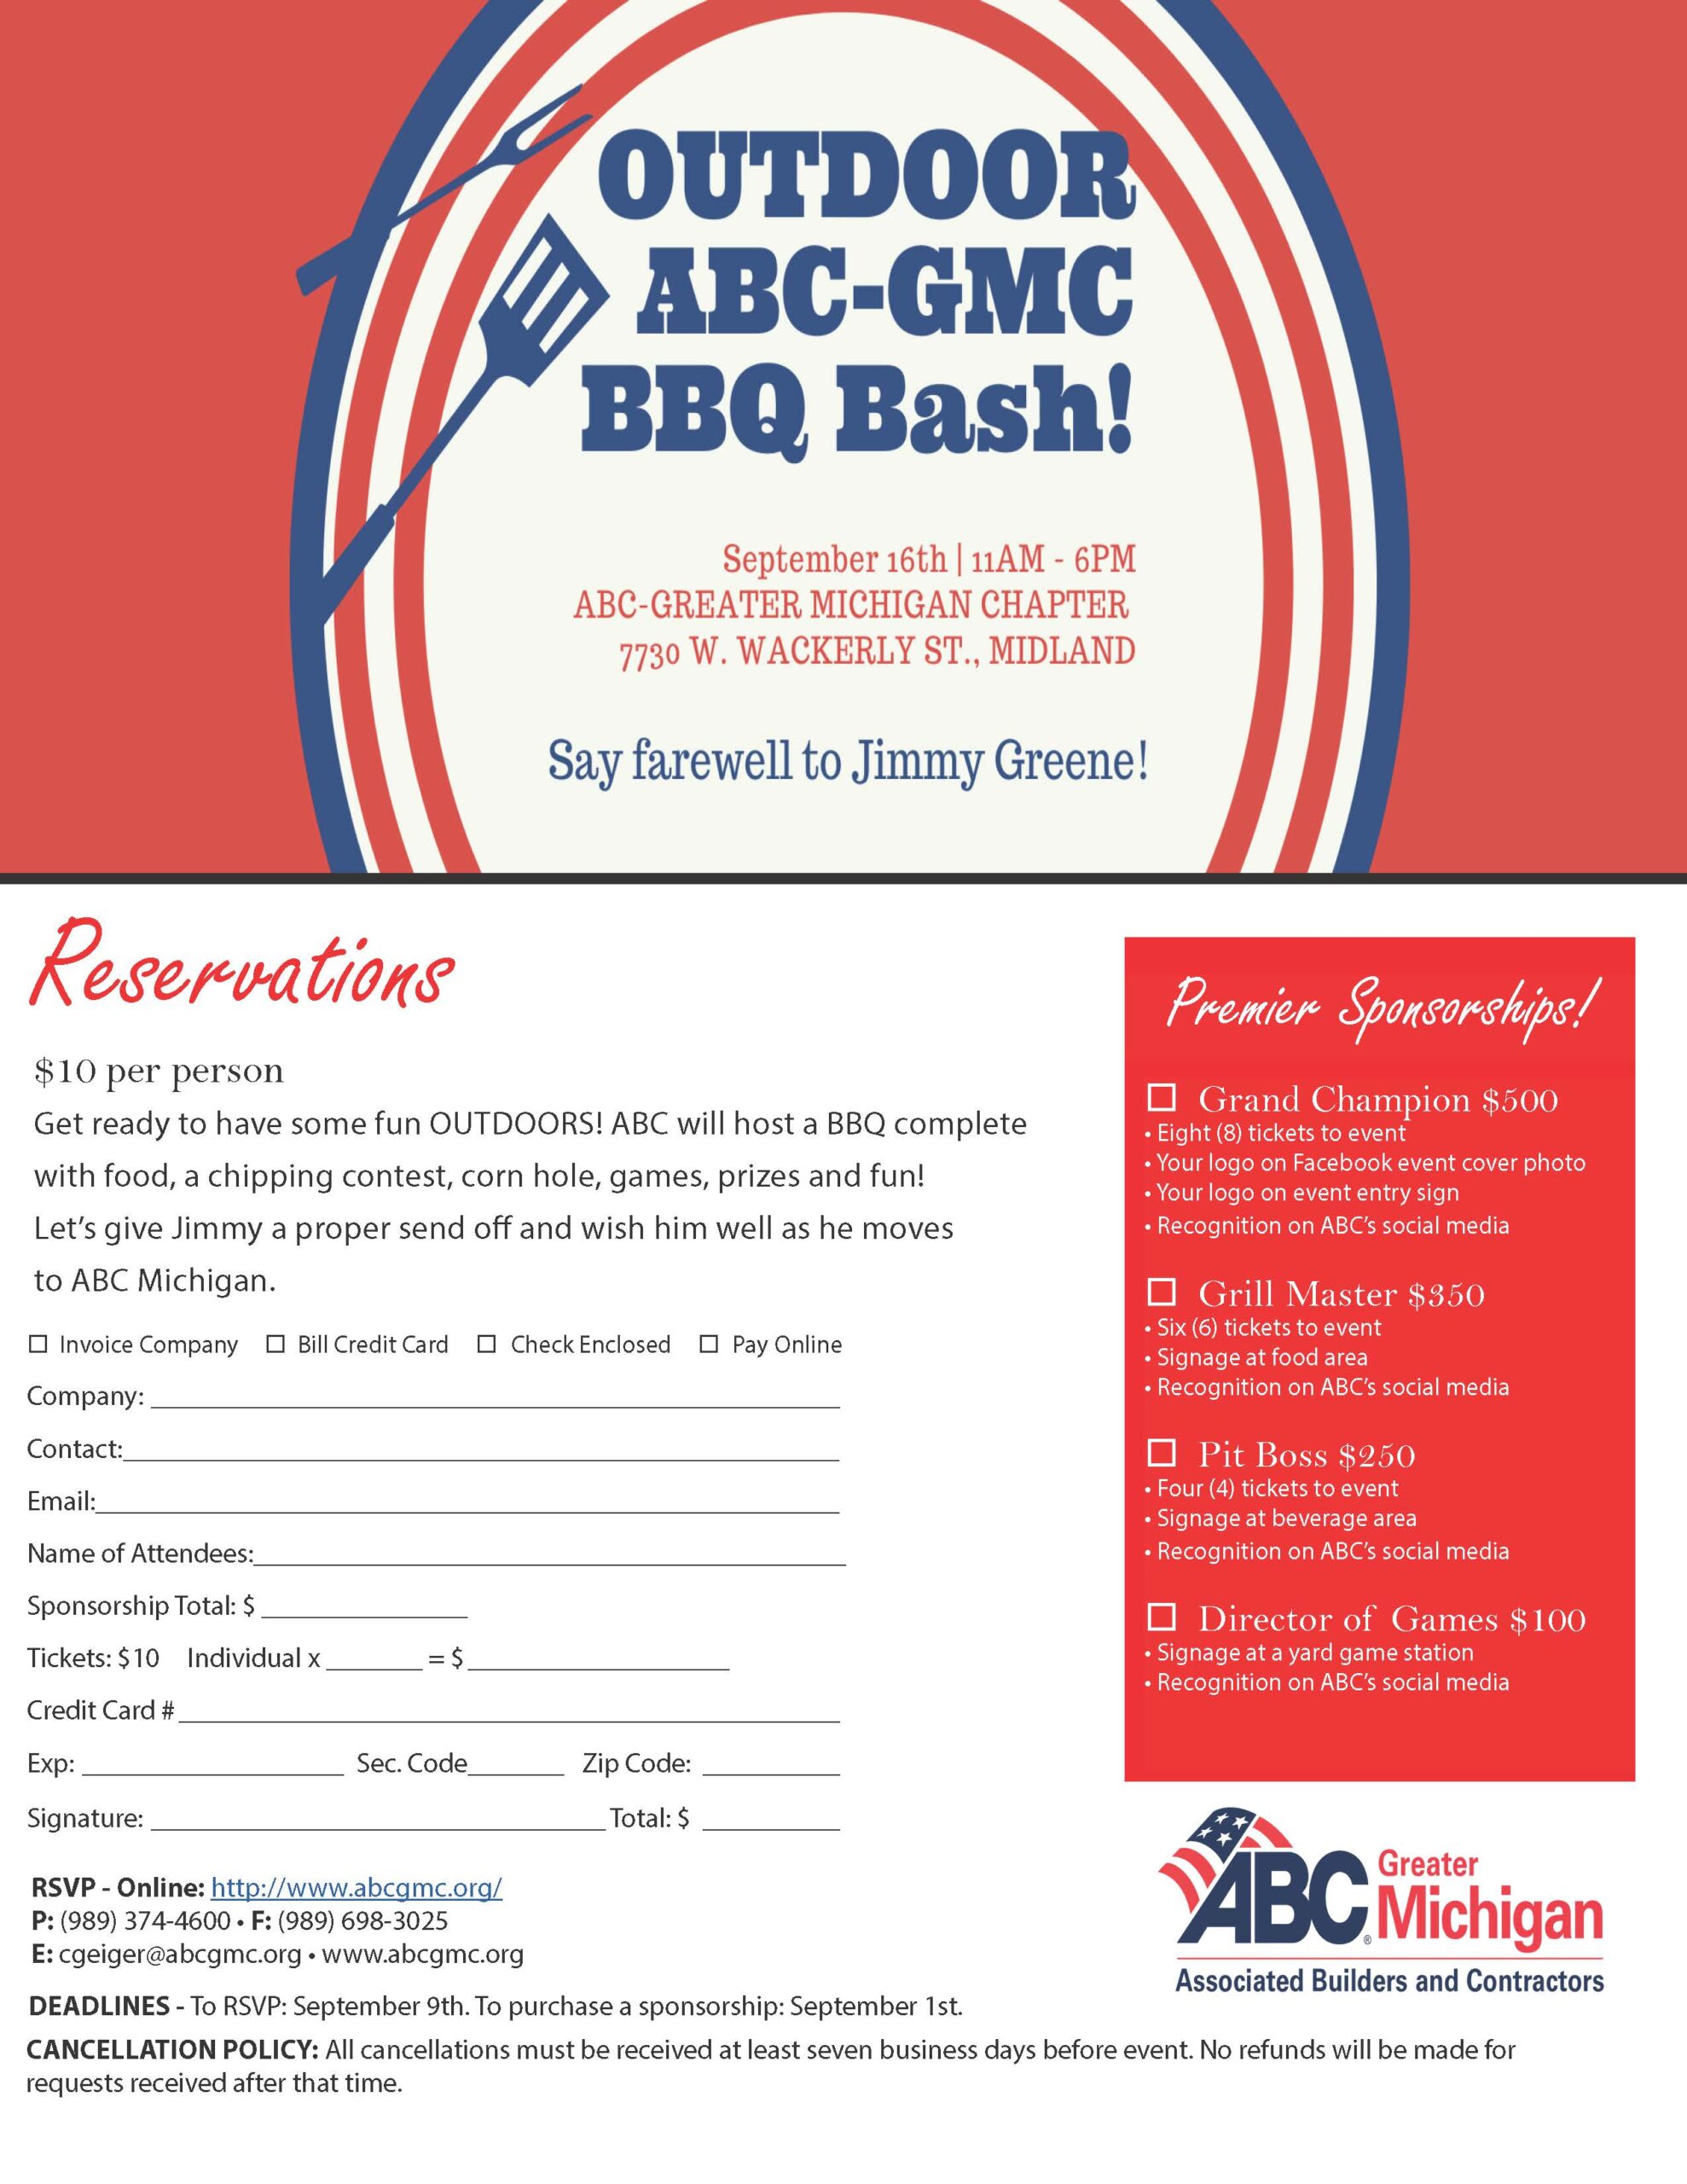 Outdoor ABC-Greater Michigan Chapter BBQ Bash